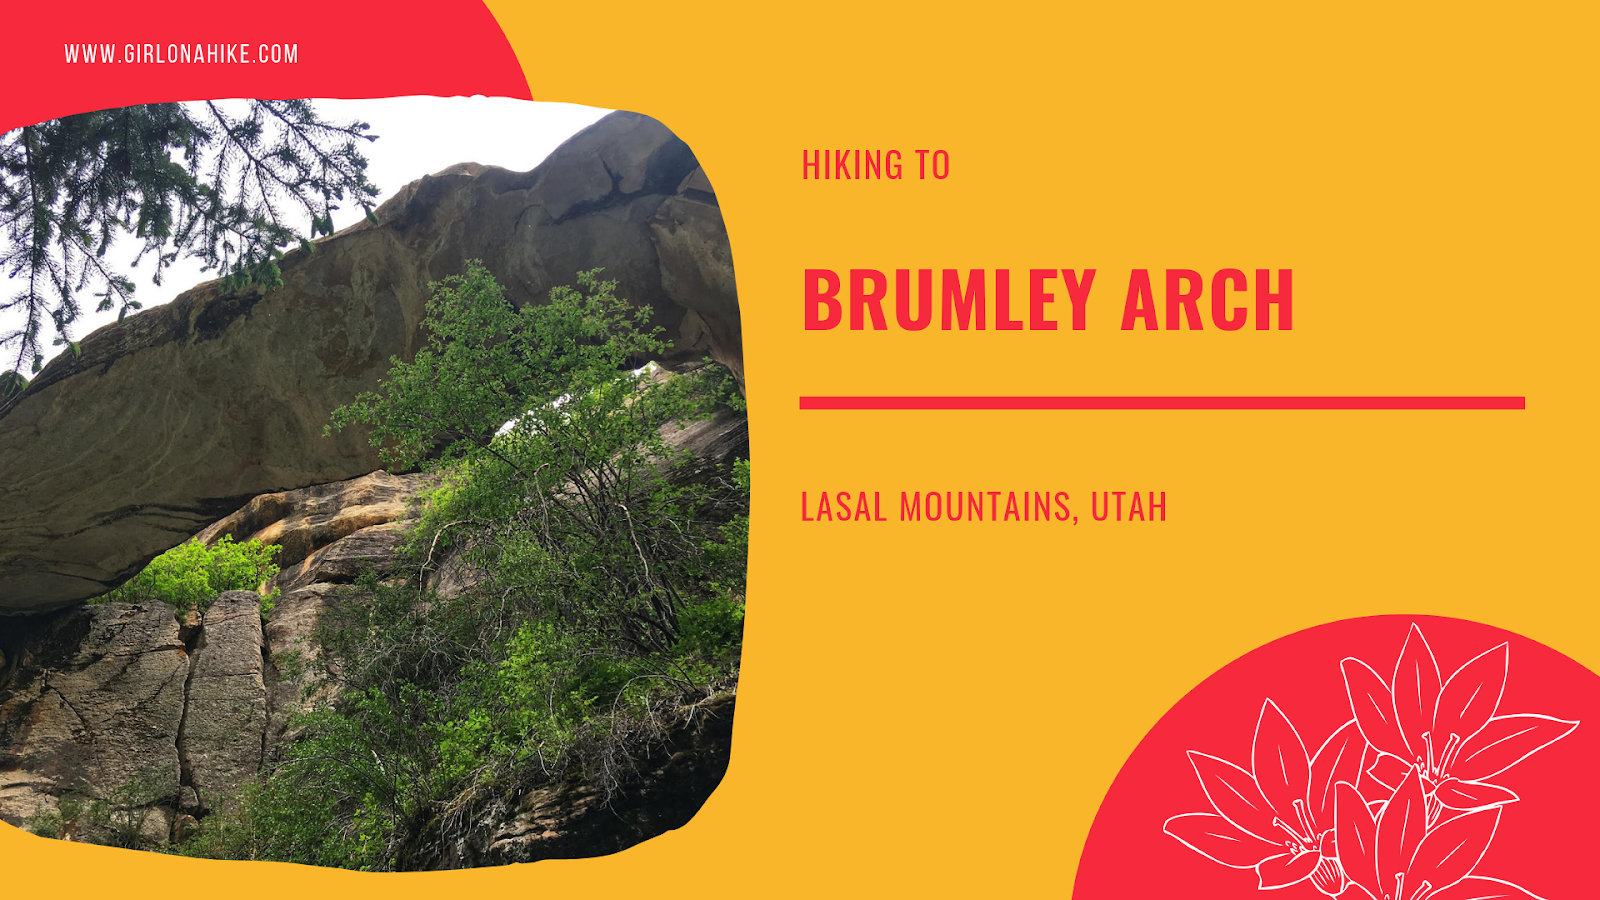 Hiking to Brumley Arch, LaSal Mountains